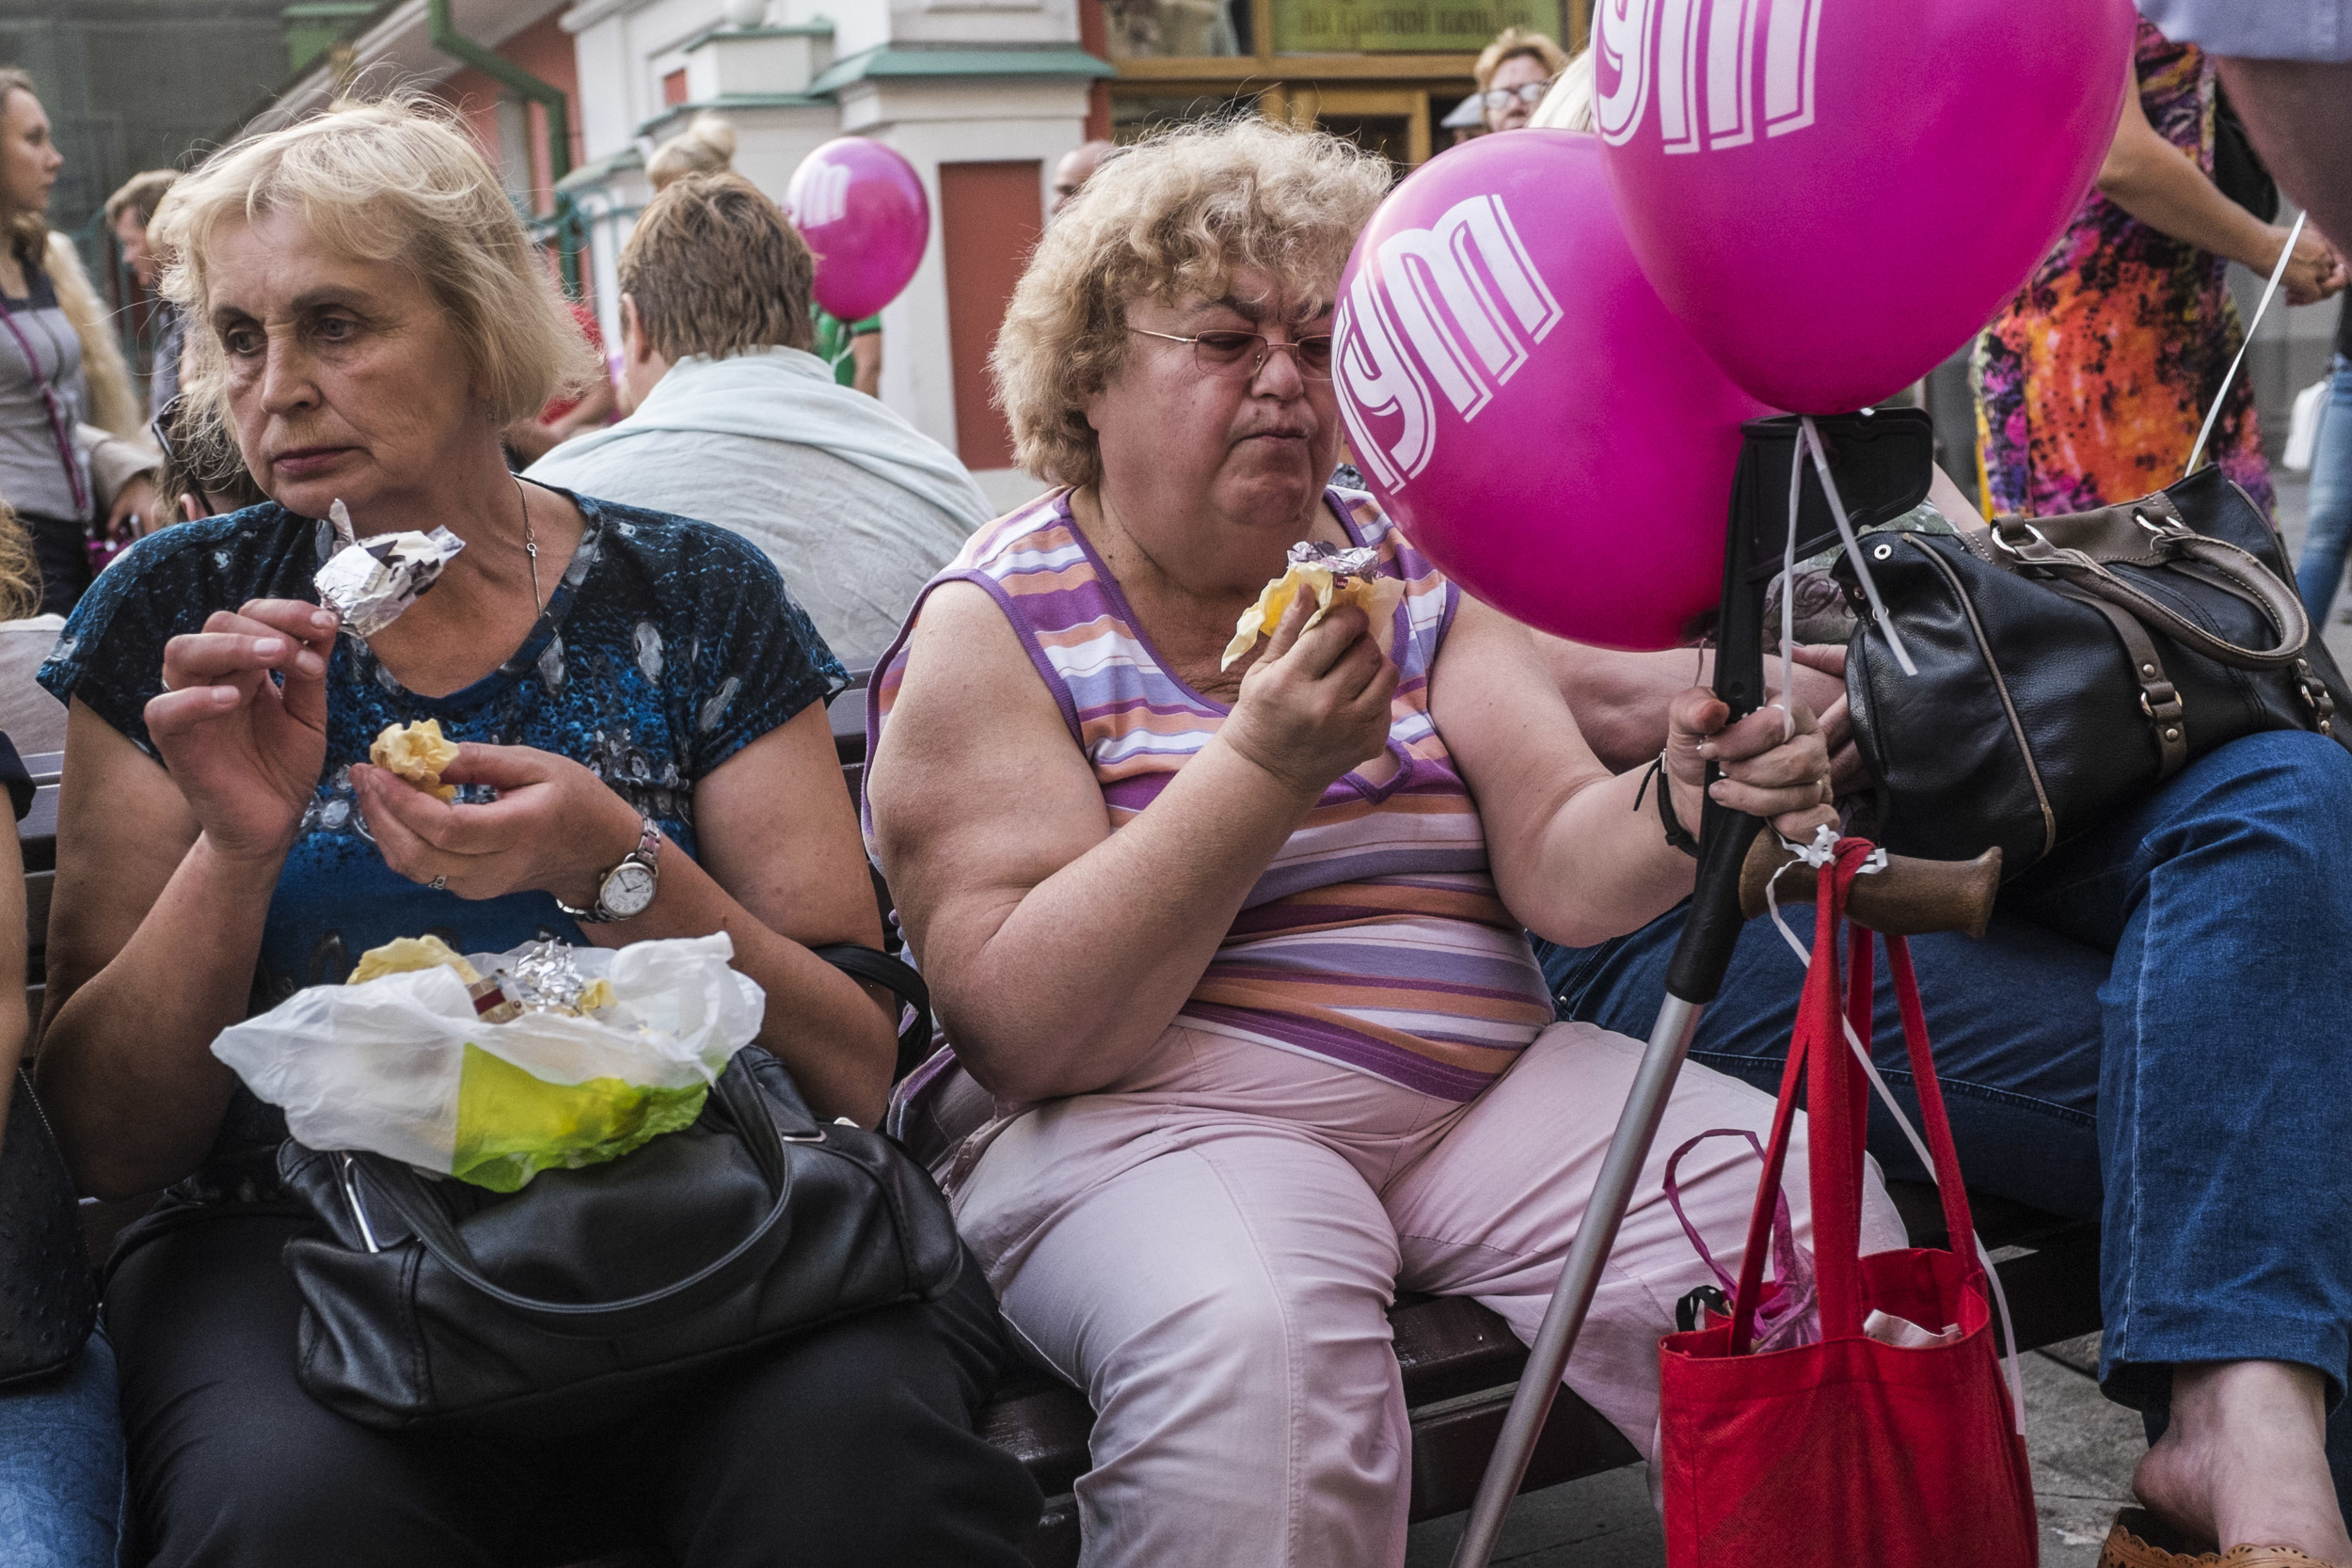 Free ice cream festival at Moscow's GUM department store. July 9, 2015